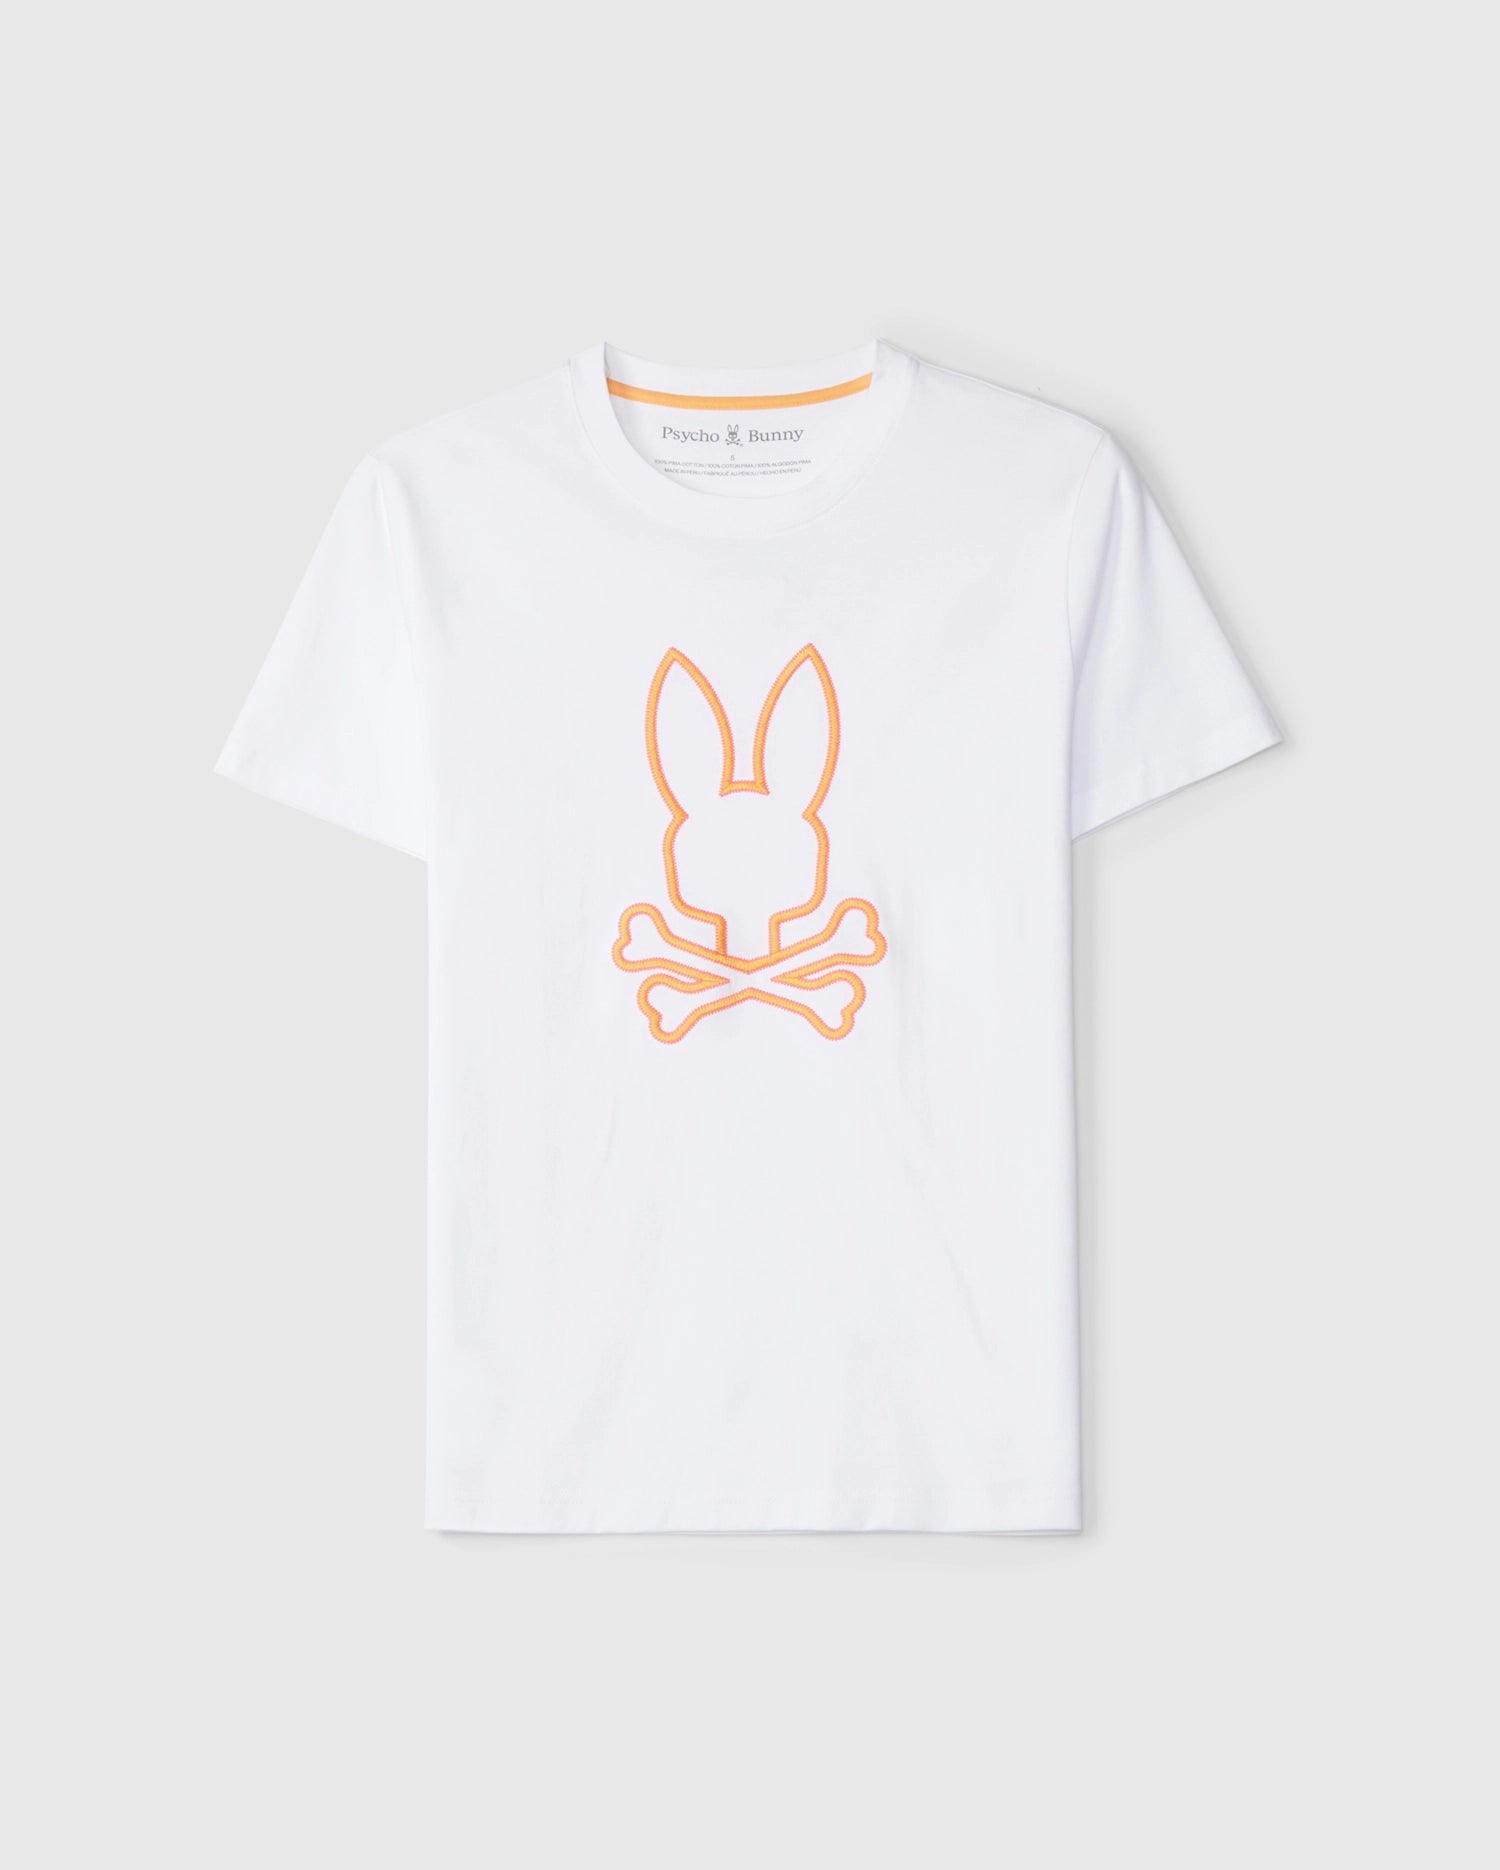 A plain white MENS FLOYD GRAPHIC TEE by Psycho Bunny featuring an embroidered orange outline of a bunny sitting above a pretzel, displayed on a neutral background. The design is minimalistic and centered on the chest area of the shirt.